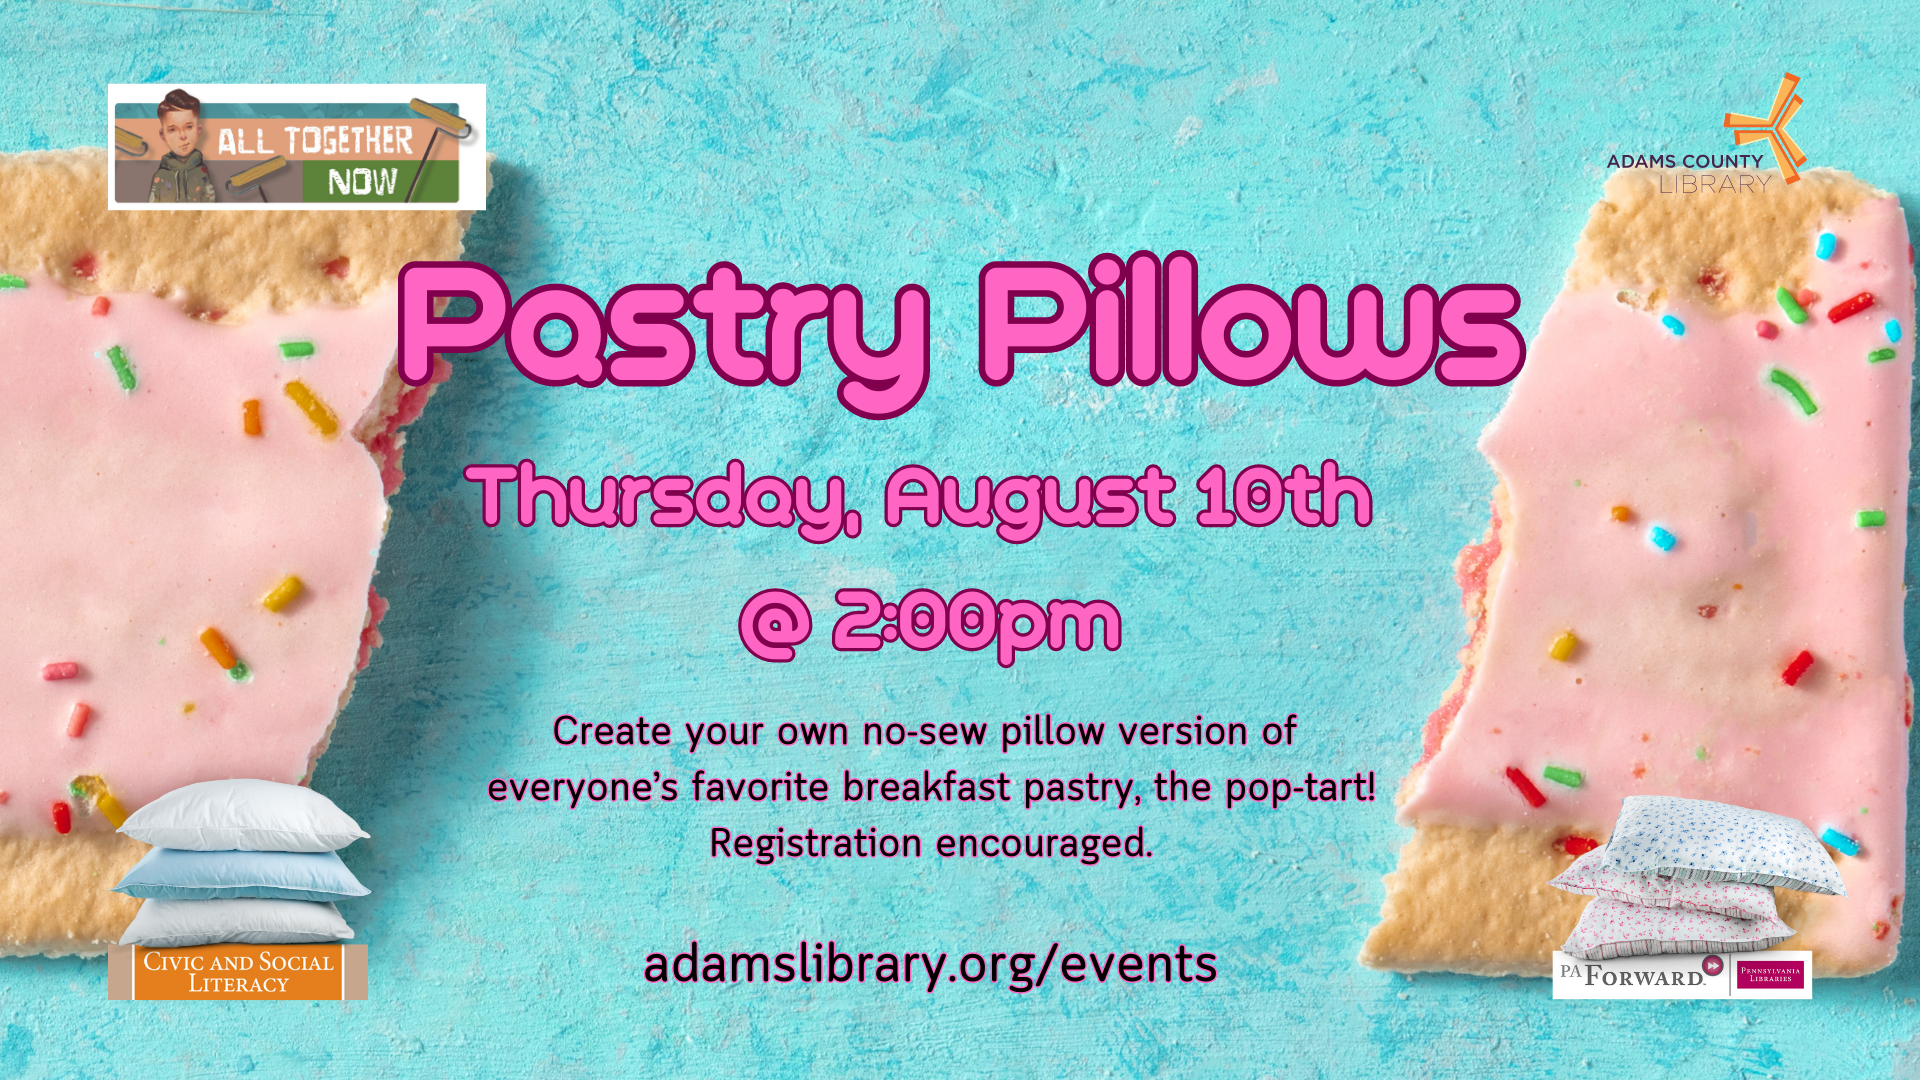 Pastry Pillows